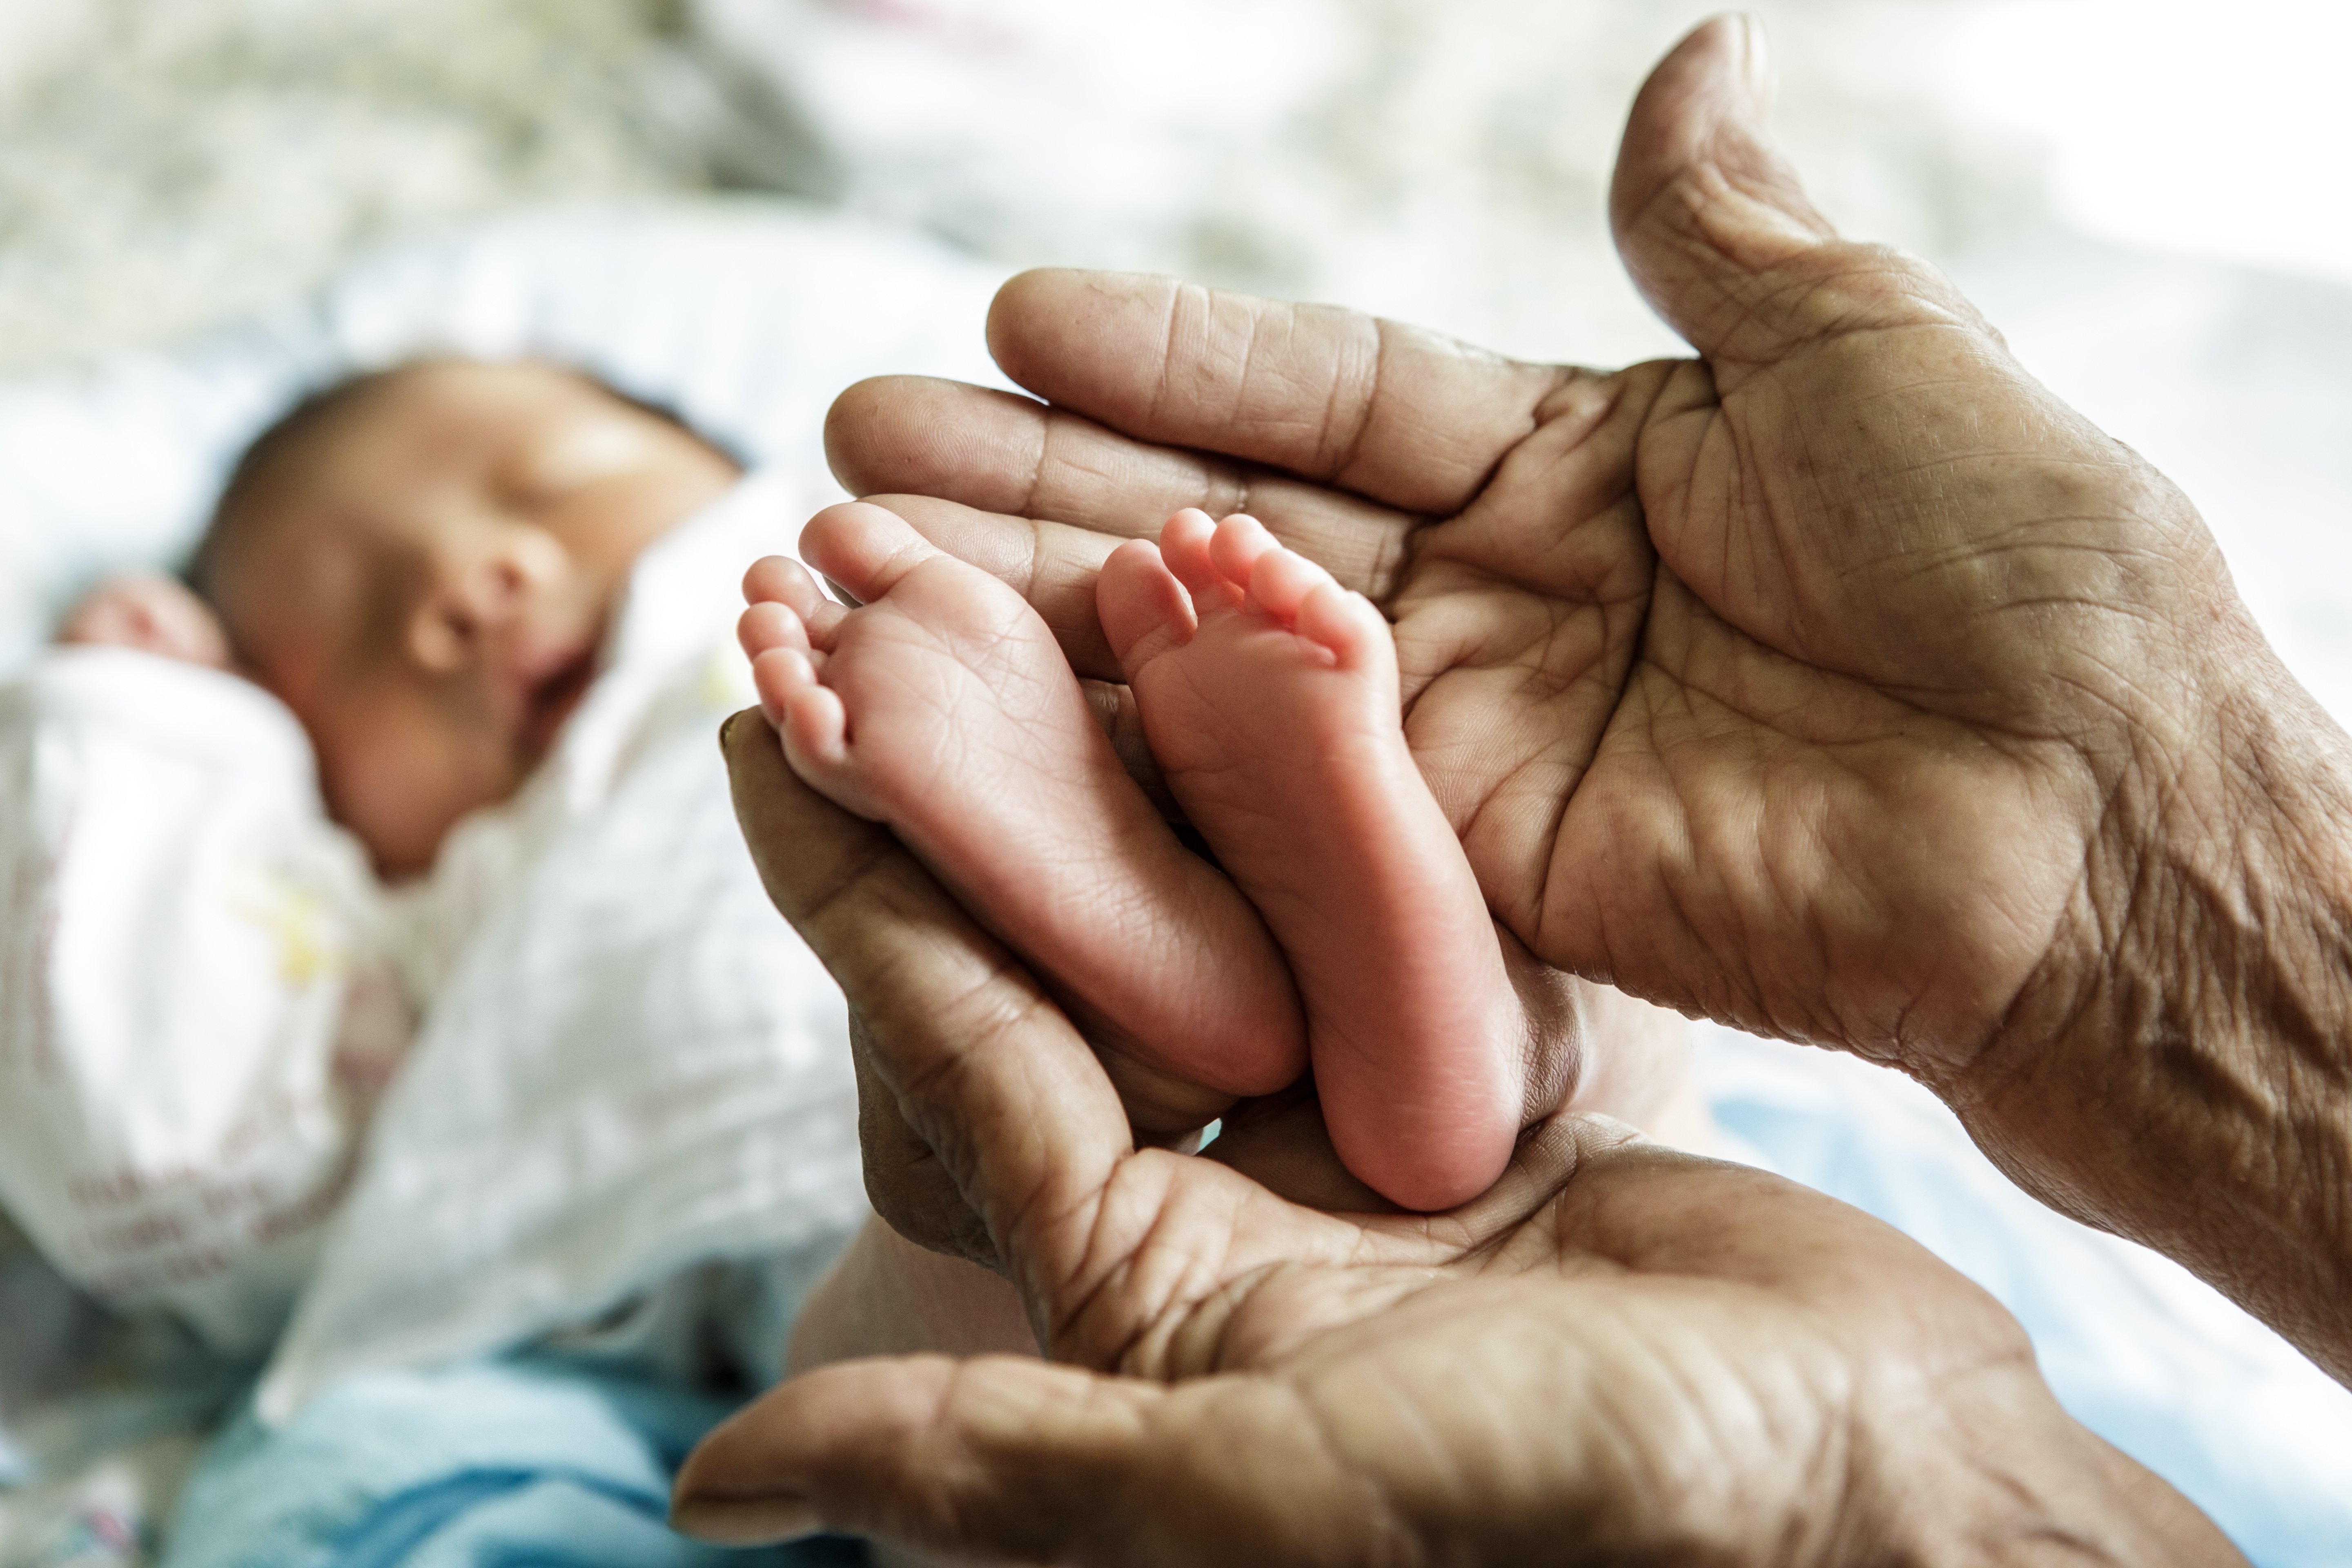 Older woman holds an infant's feet in her hands. | Source: Shutterstock